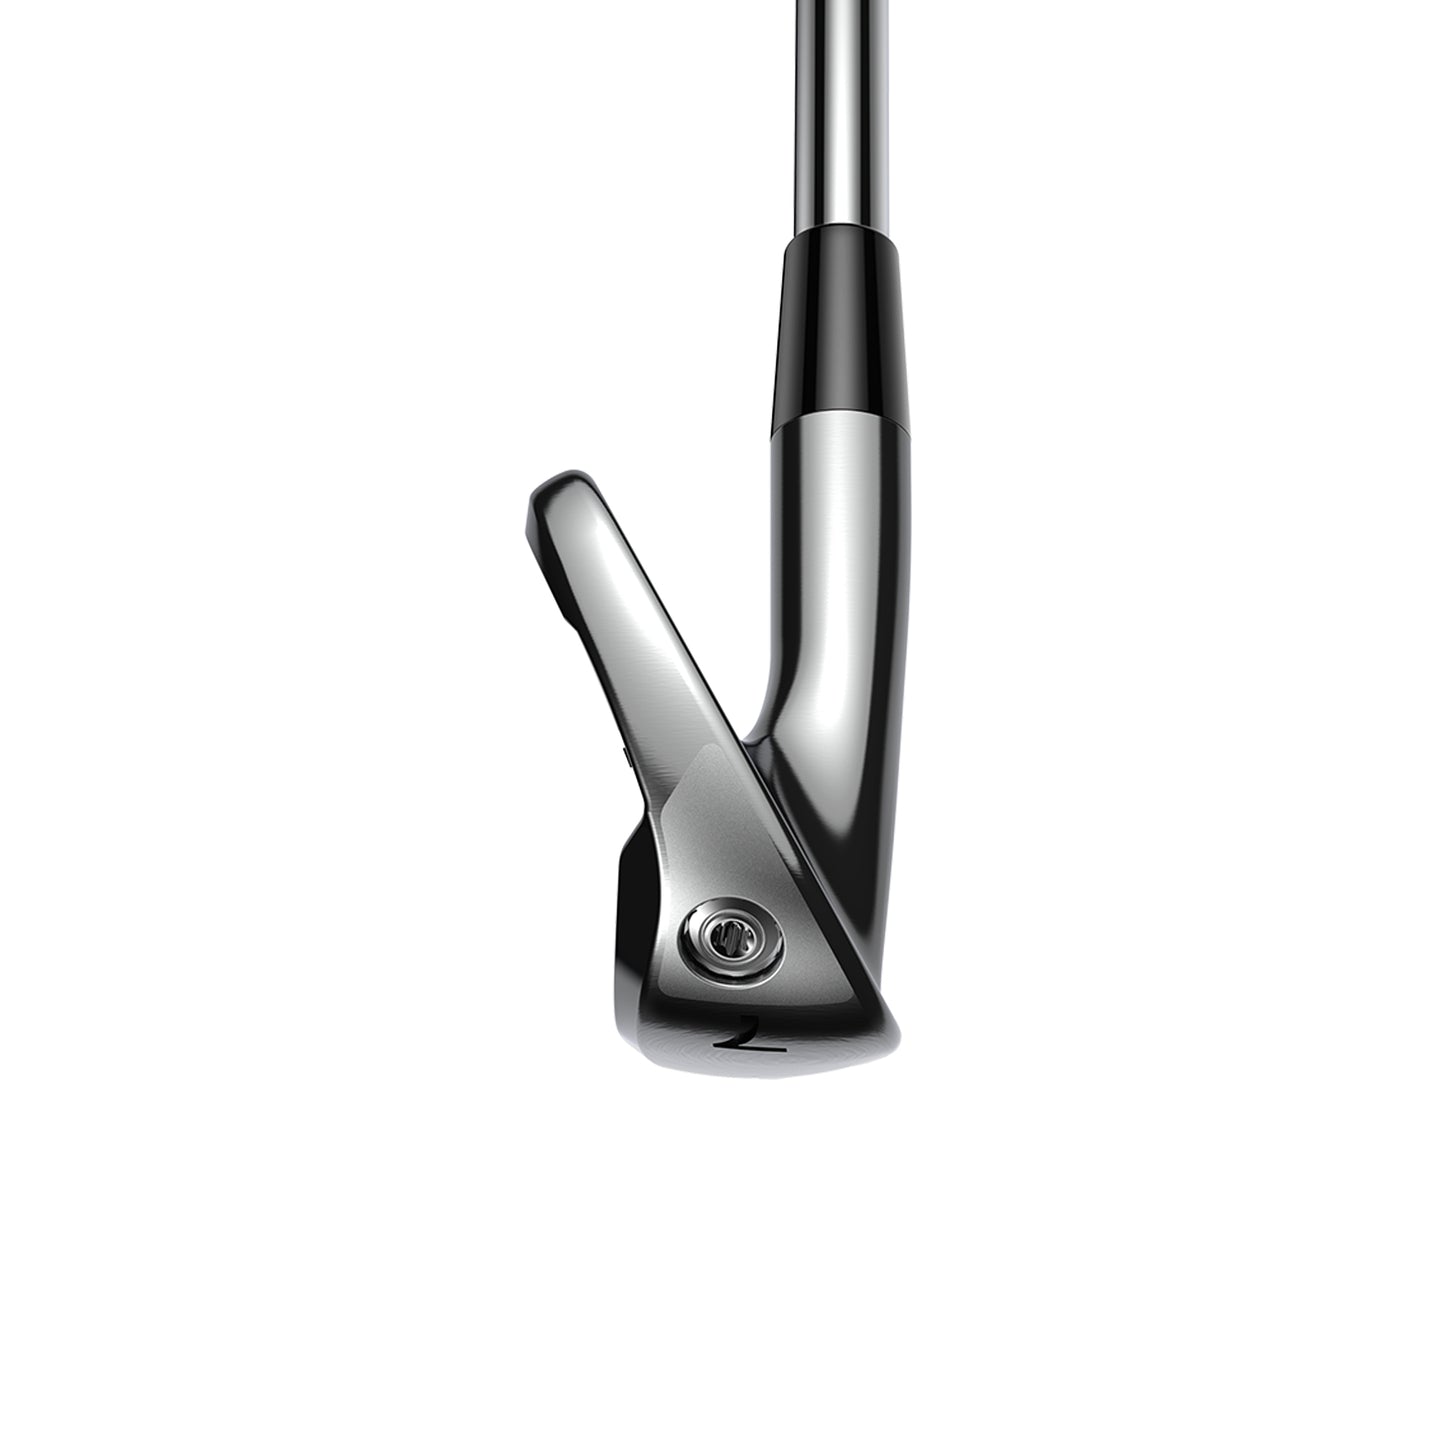 KING Forged Tec Irons